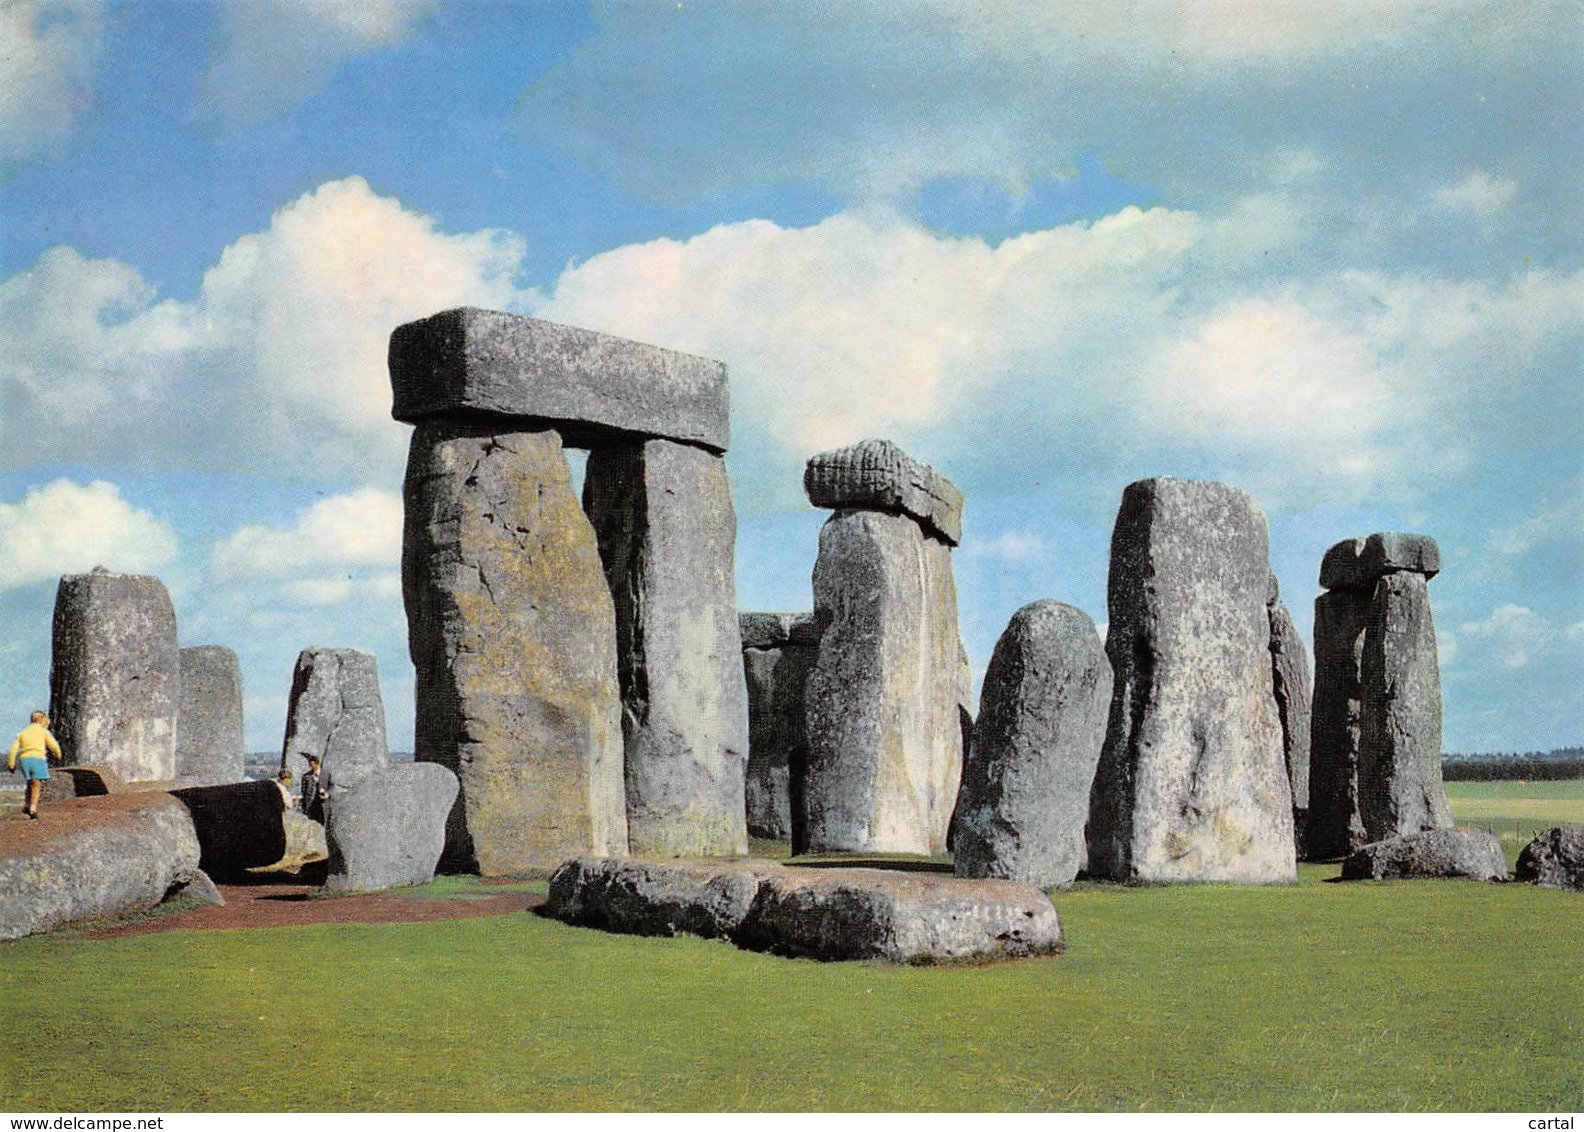 CPM - WILTSHIRE - Stonehenge - View Looking North-east, Showing Trilithons 53-4 And 51-2 - Stonehenge